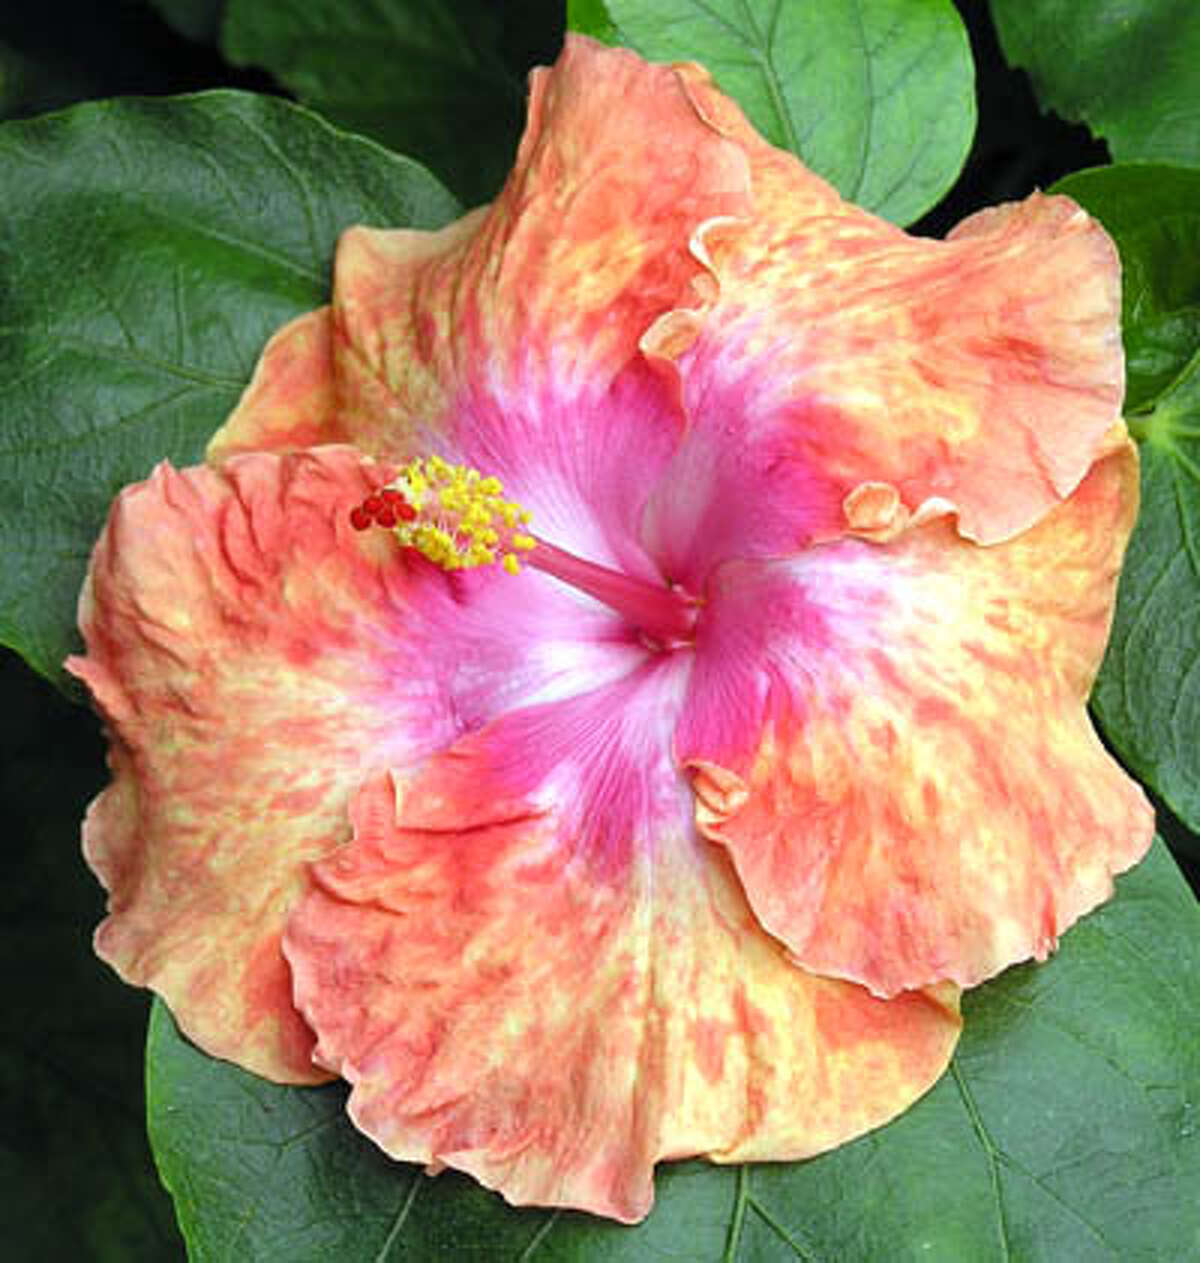 'Tropical hibiscus blooms such as Pineapple Sherbert' are a highlight in the summer garden. Courtesy photo